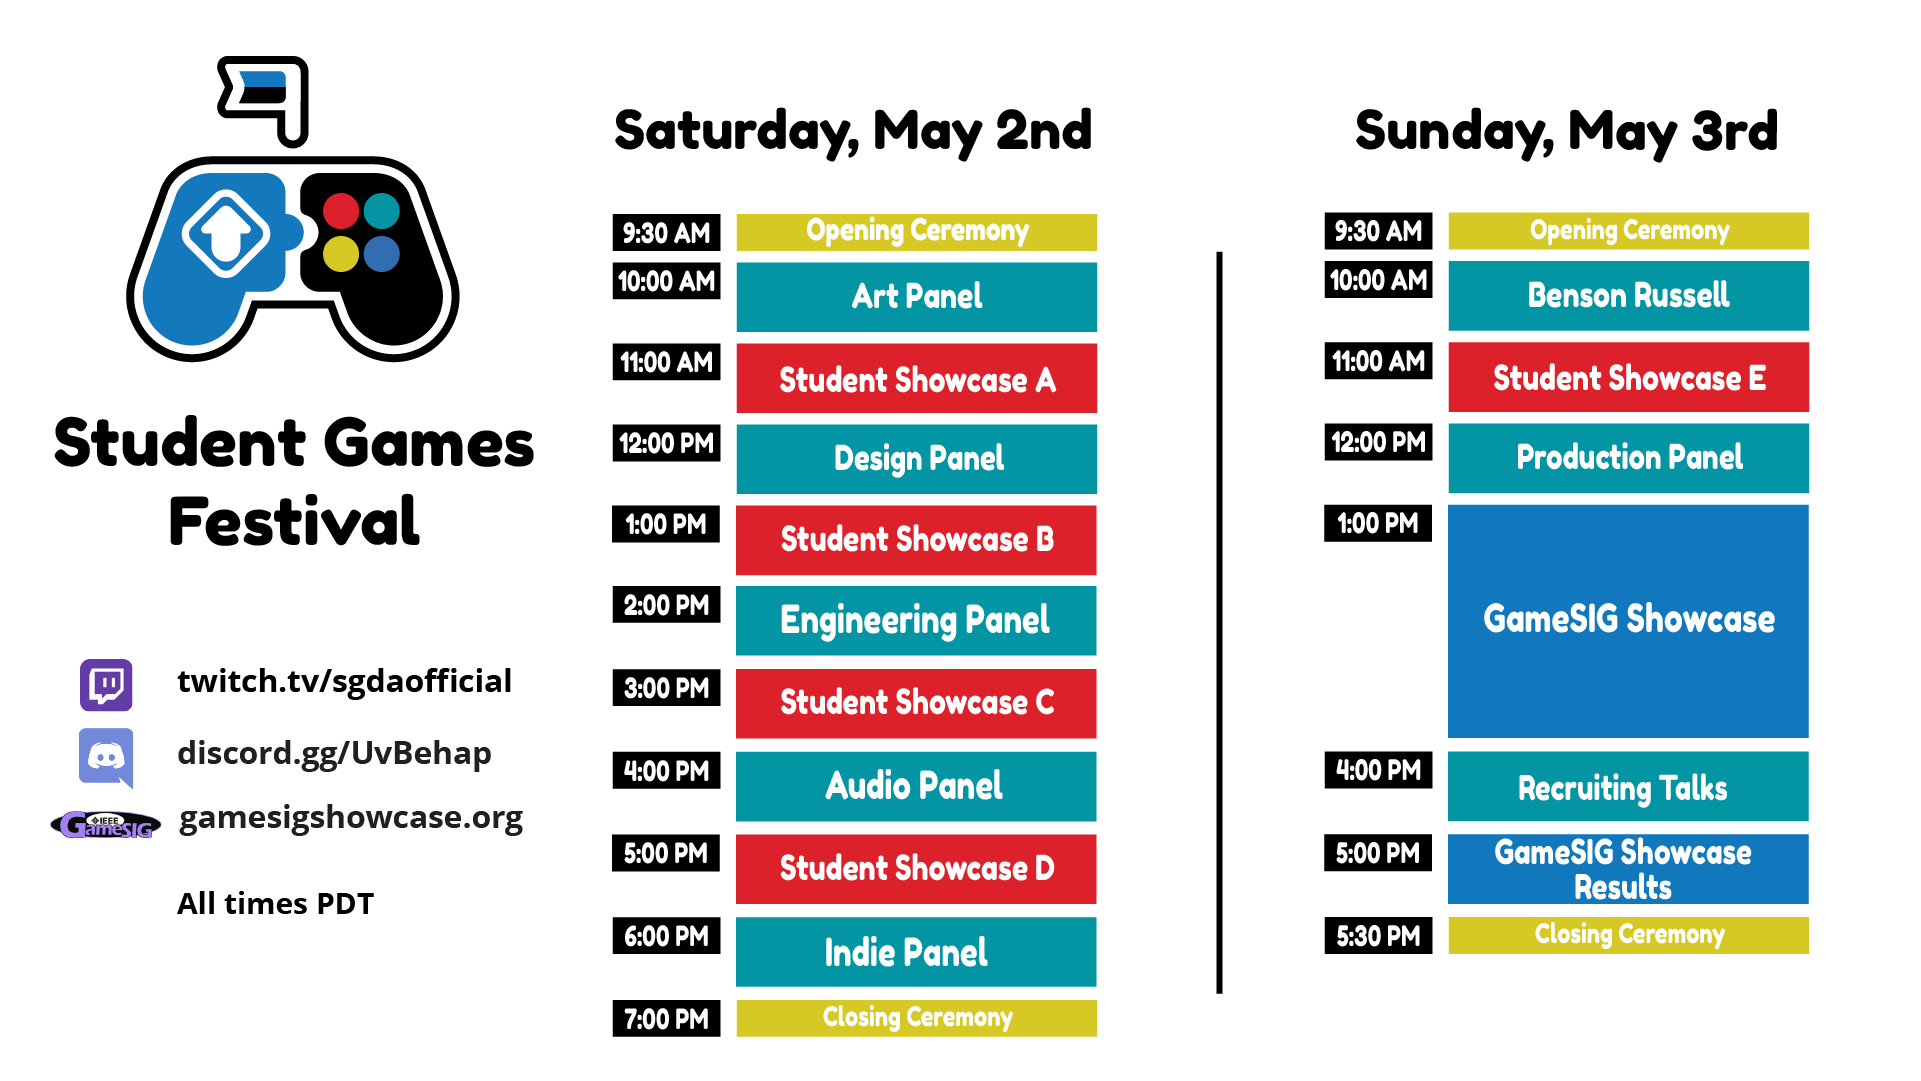 Image of schedule for the SGDA event.